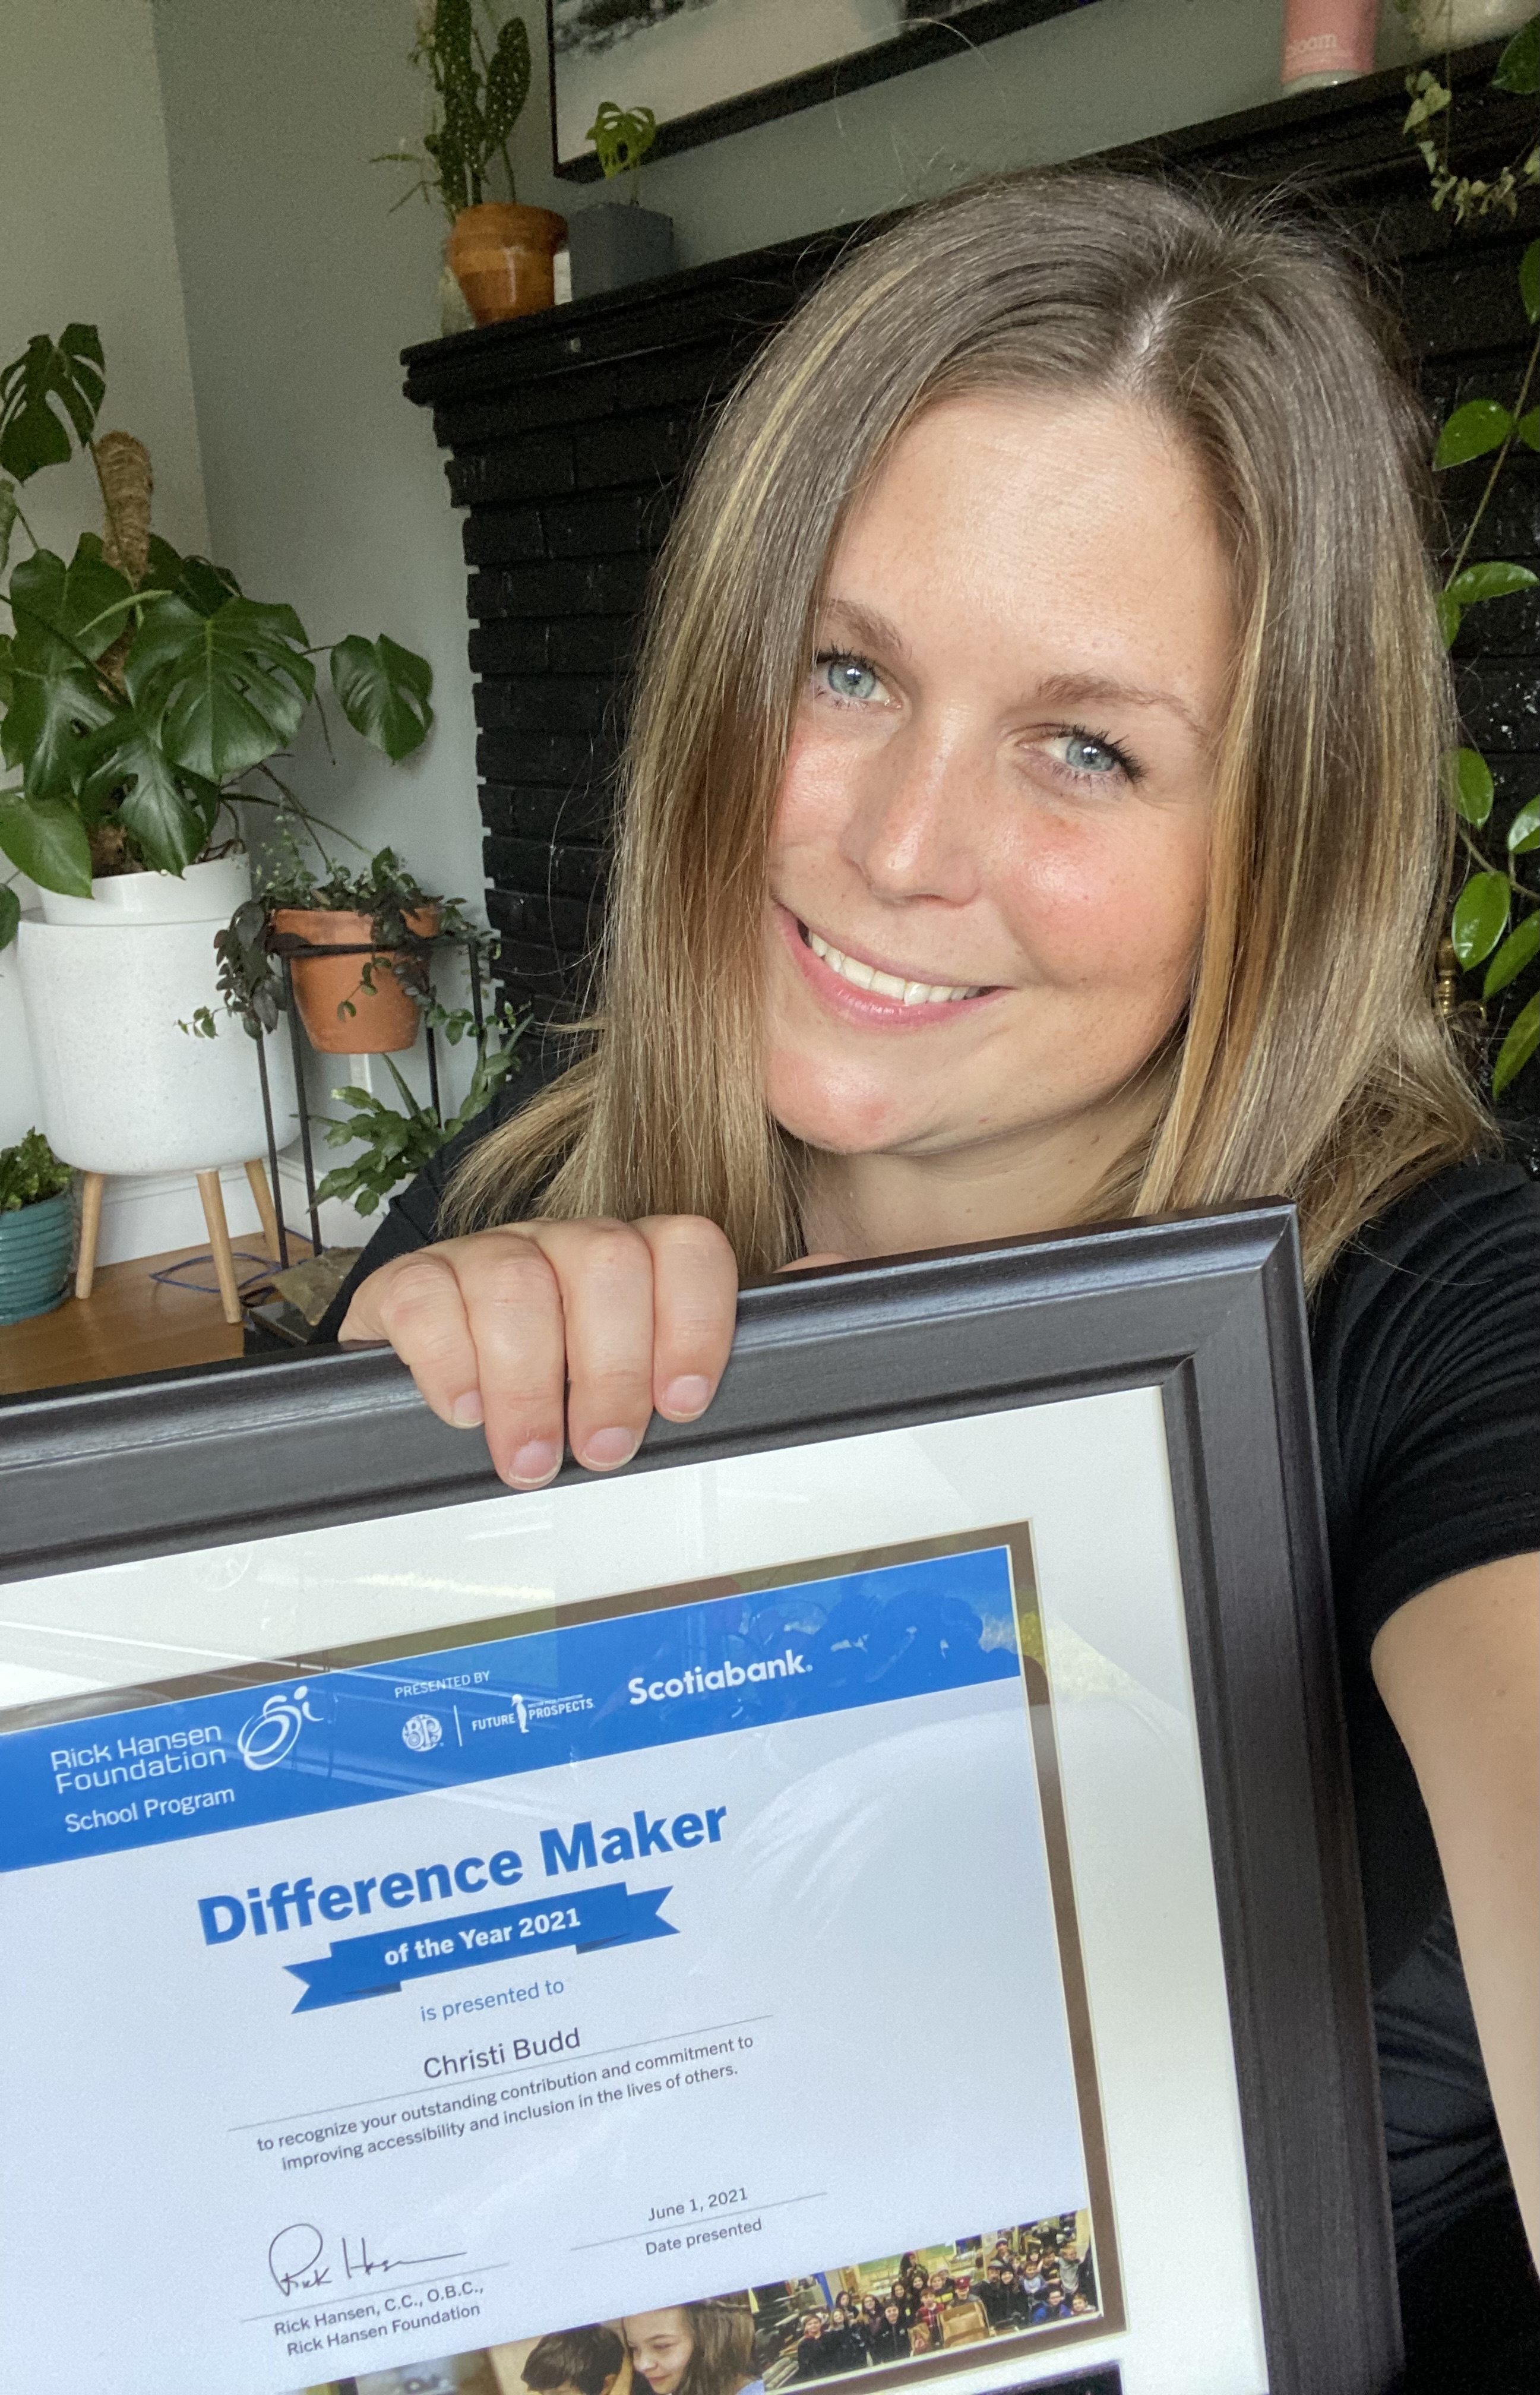 woman with short brown hair holds up a difference maker award certificate